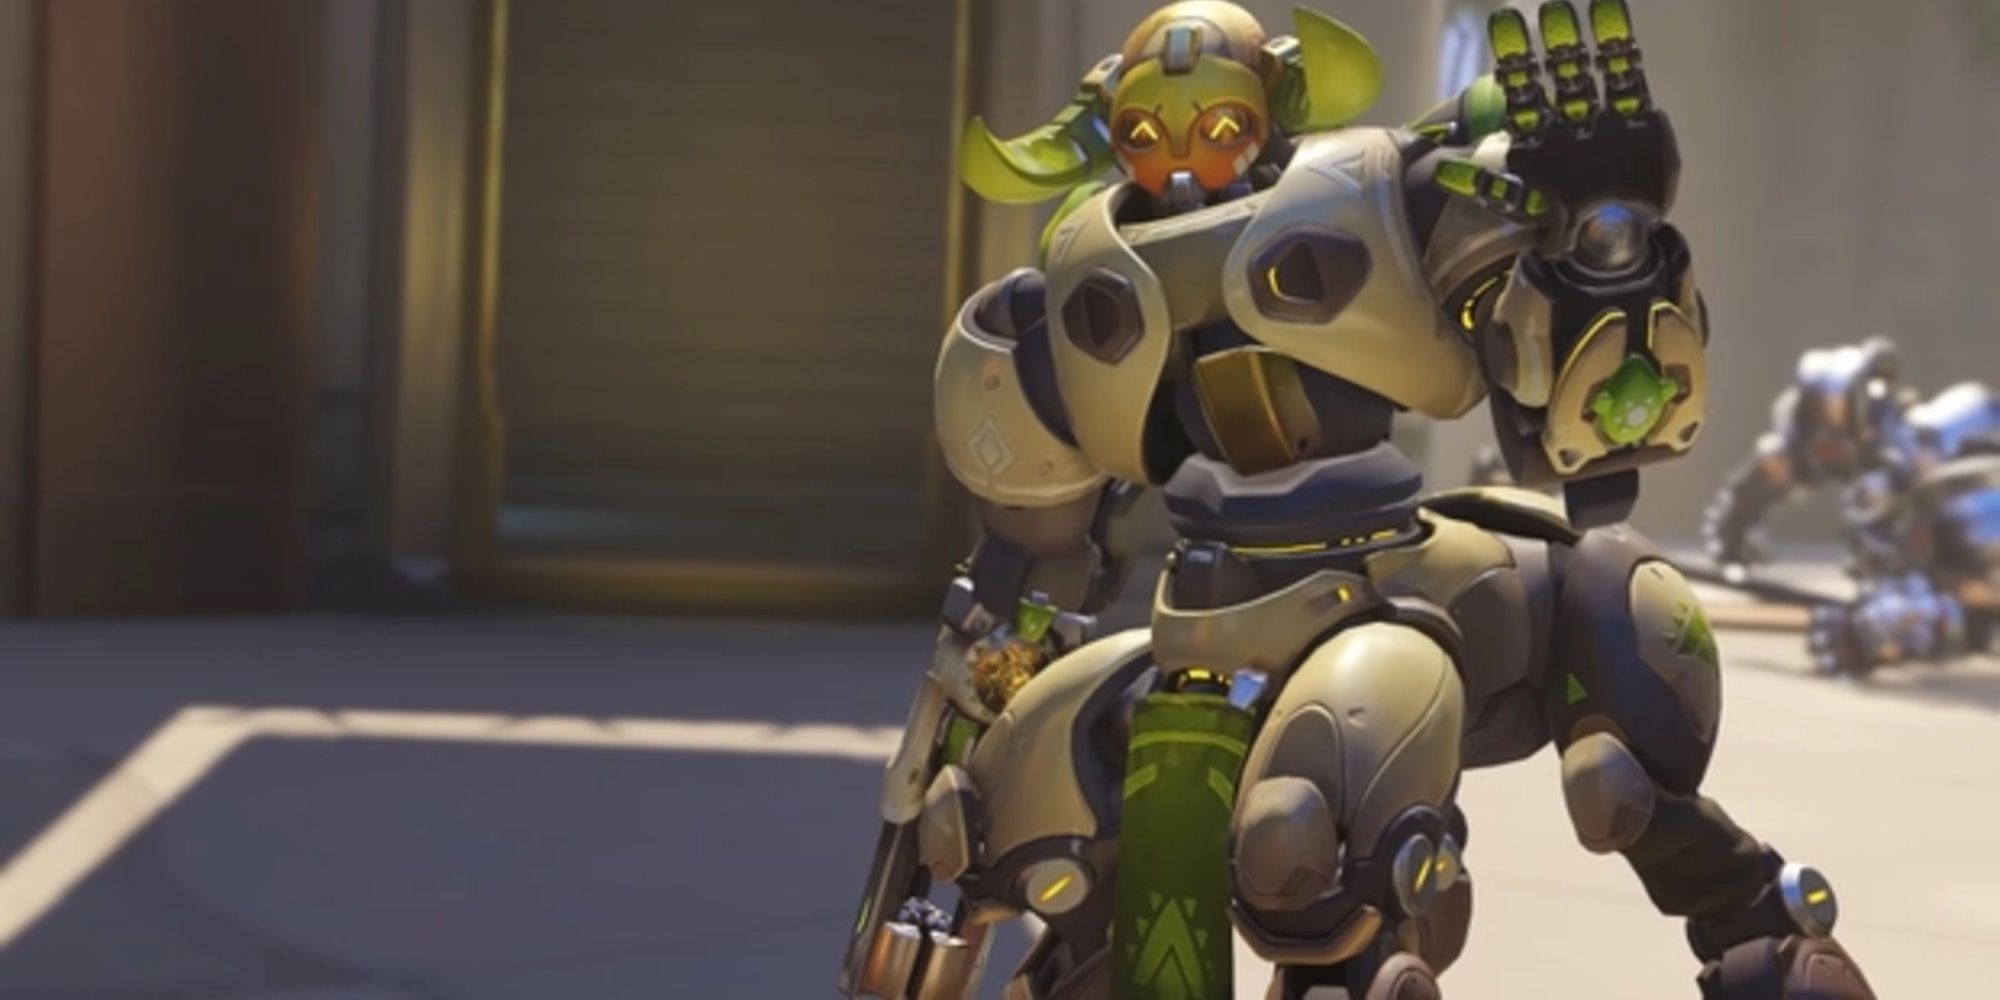 Orisa waving to the camera as part of her default highlight intro in Overwatch.